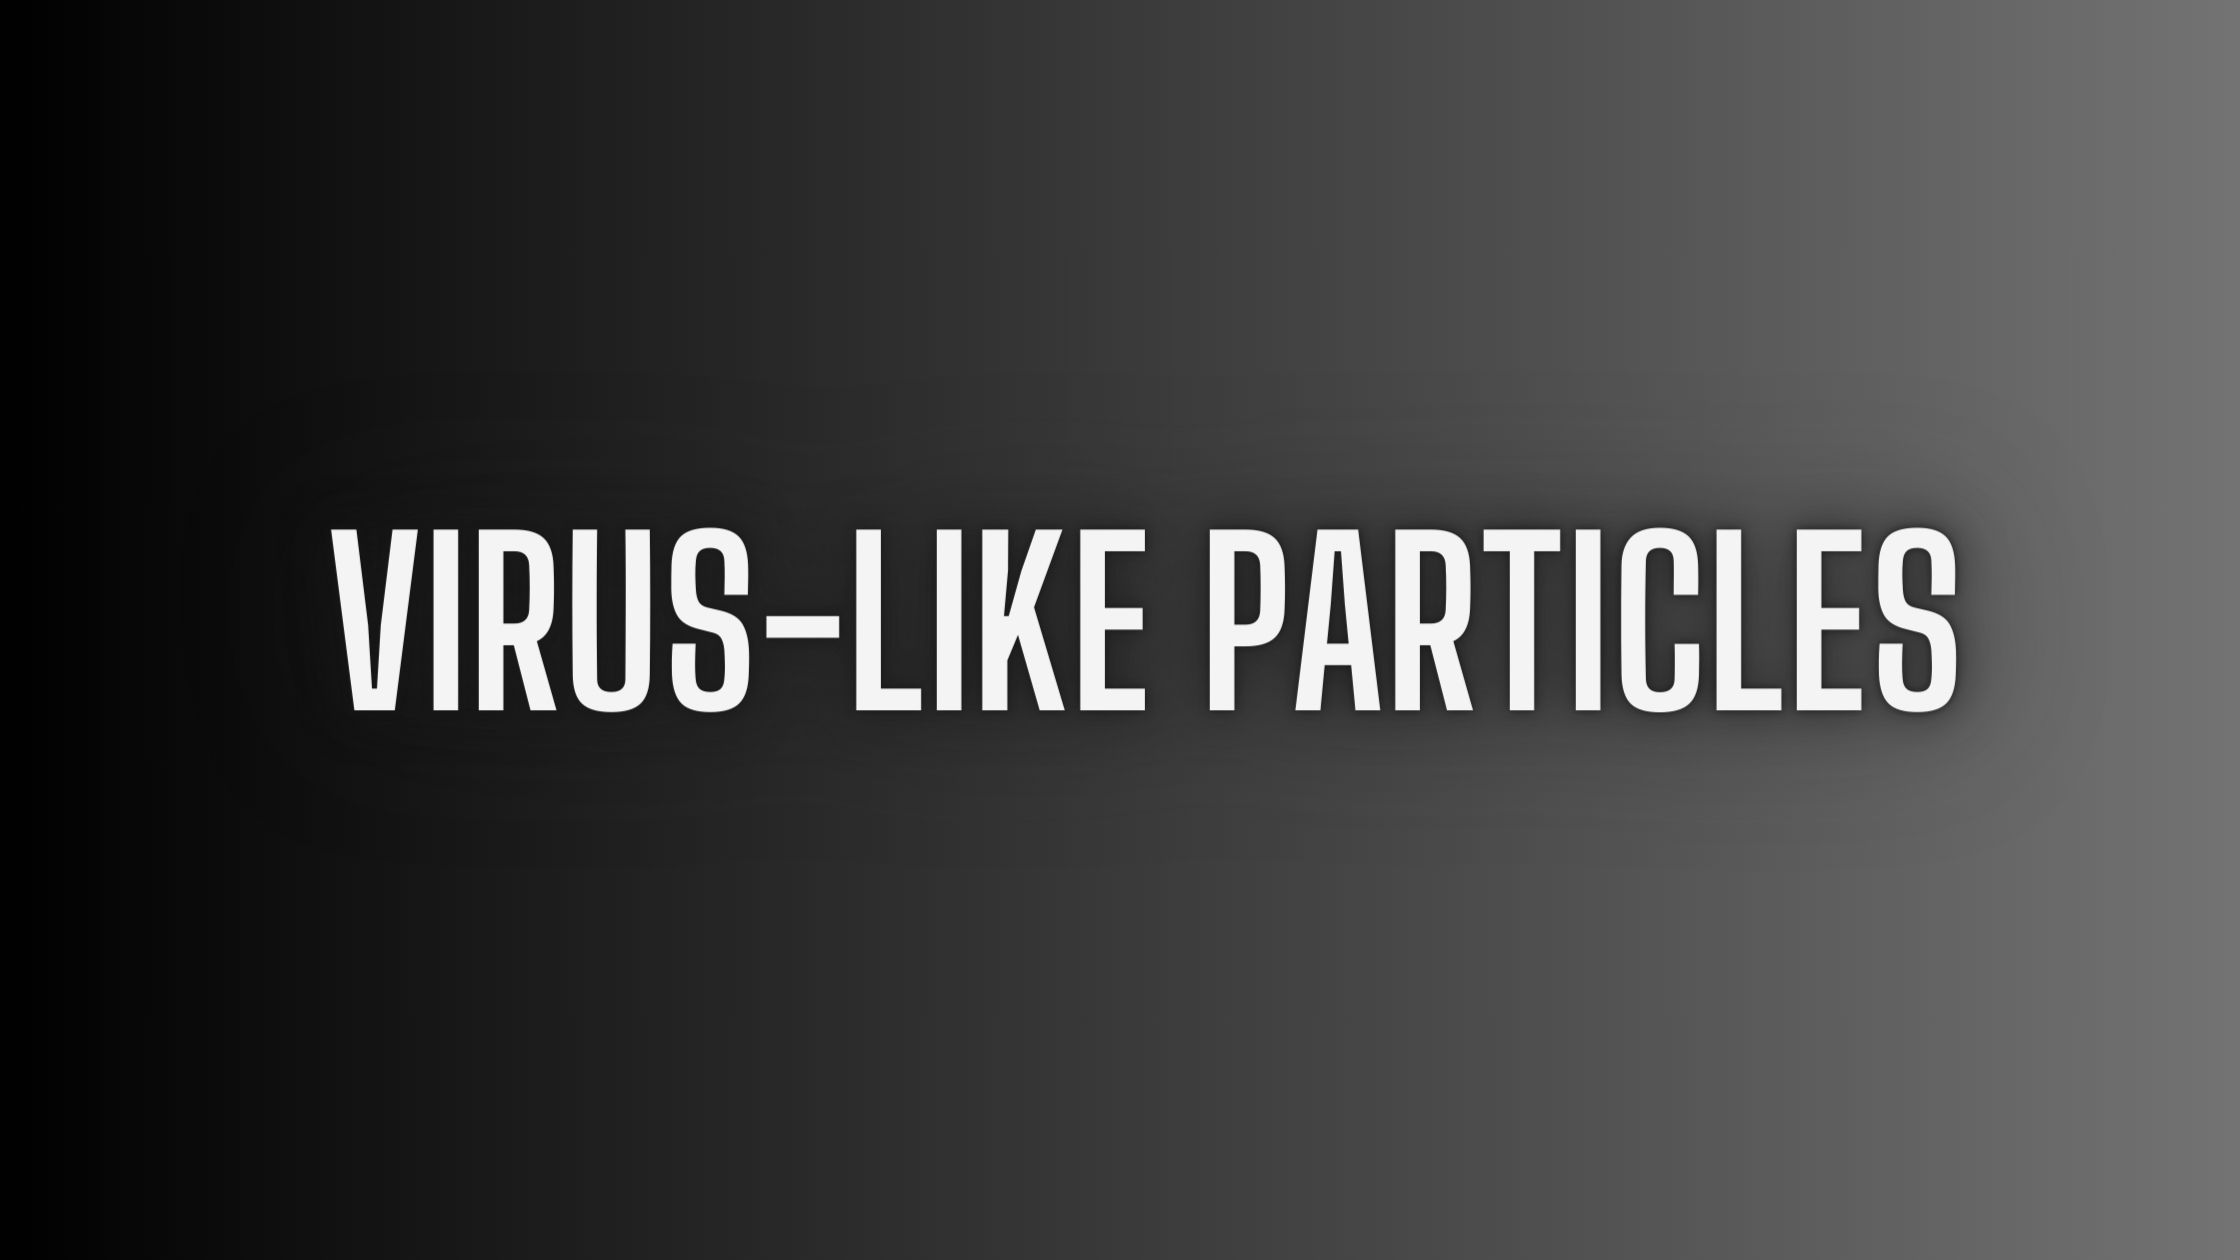 img-VIRUS-LIKE PARTICLES THIS TOPIC IS RELEVANT IN THE “SCIENCE & TECHNOLOGY” SECTION OF THE UPSC EXAM.